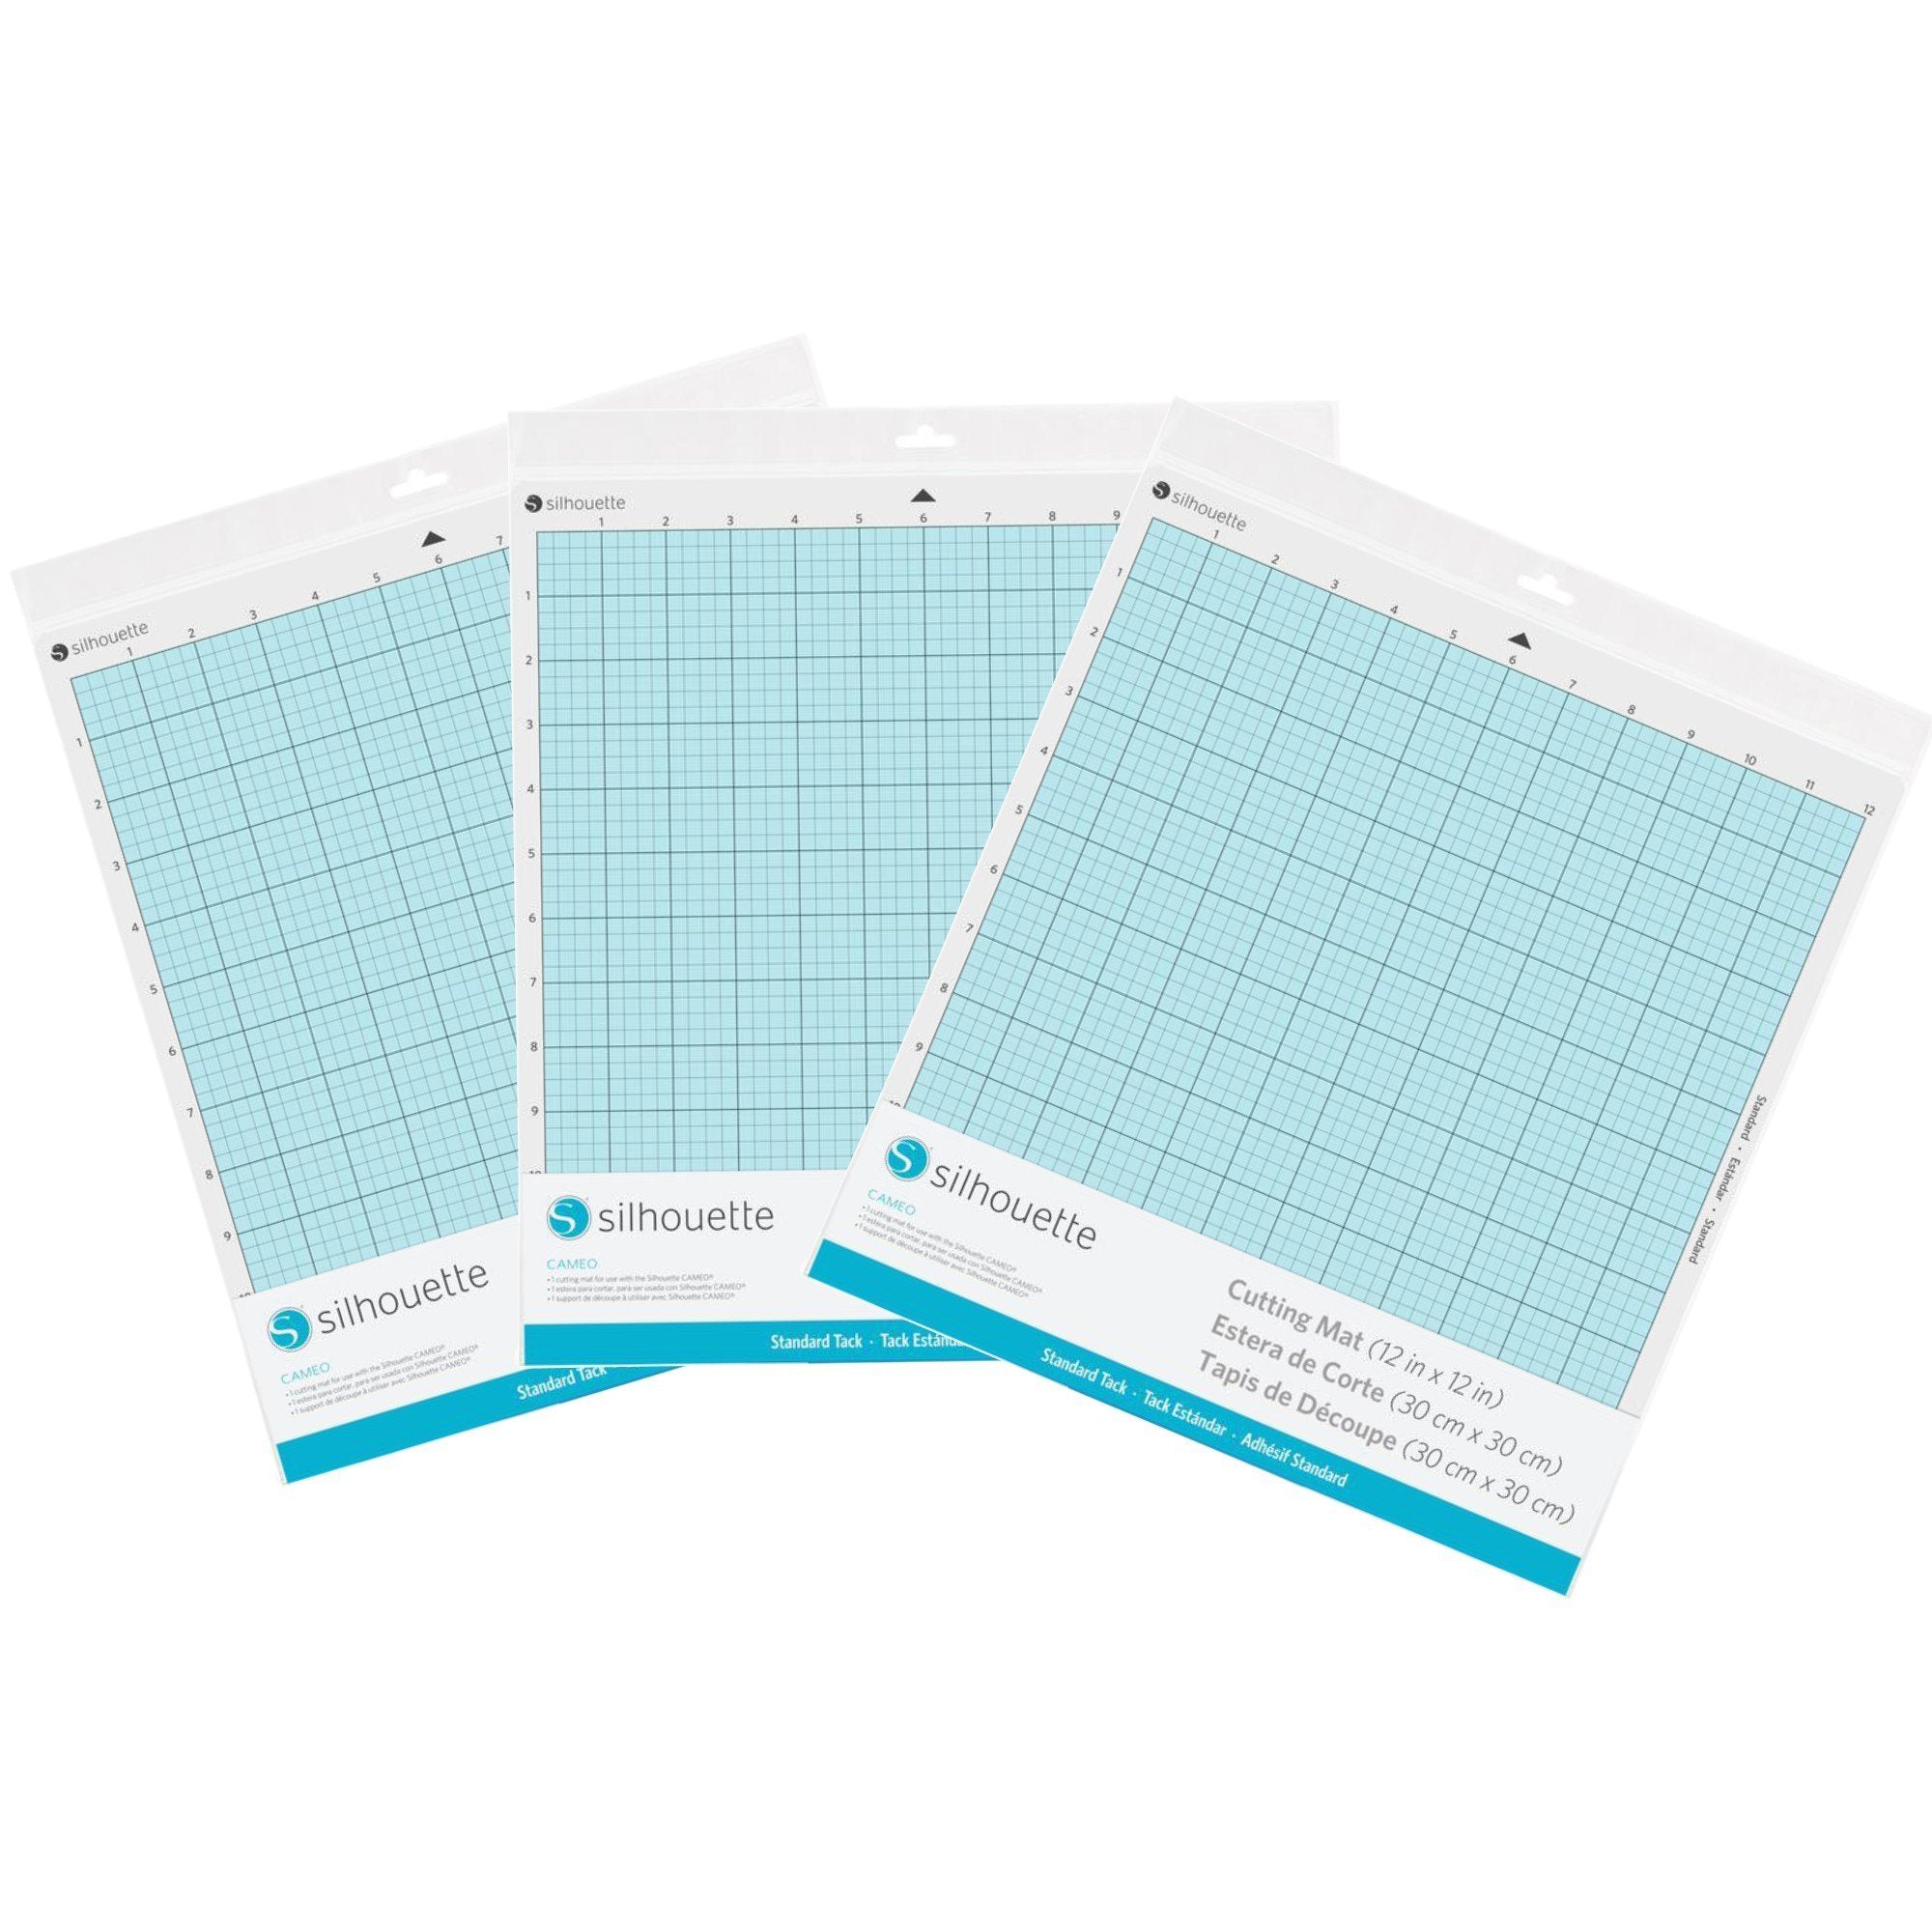 Craftercuts - If you need some new mats for your Silhouette Cameo, pick up  the CrafterCuts Matted Out Bundle! This variety pack includes the 12x24 mat,  12x12 standard tack mat, and the